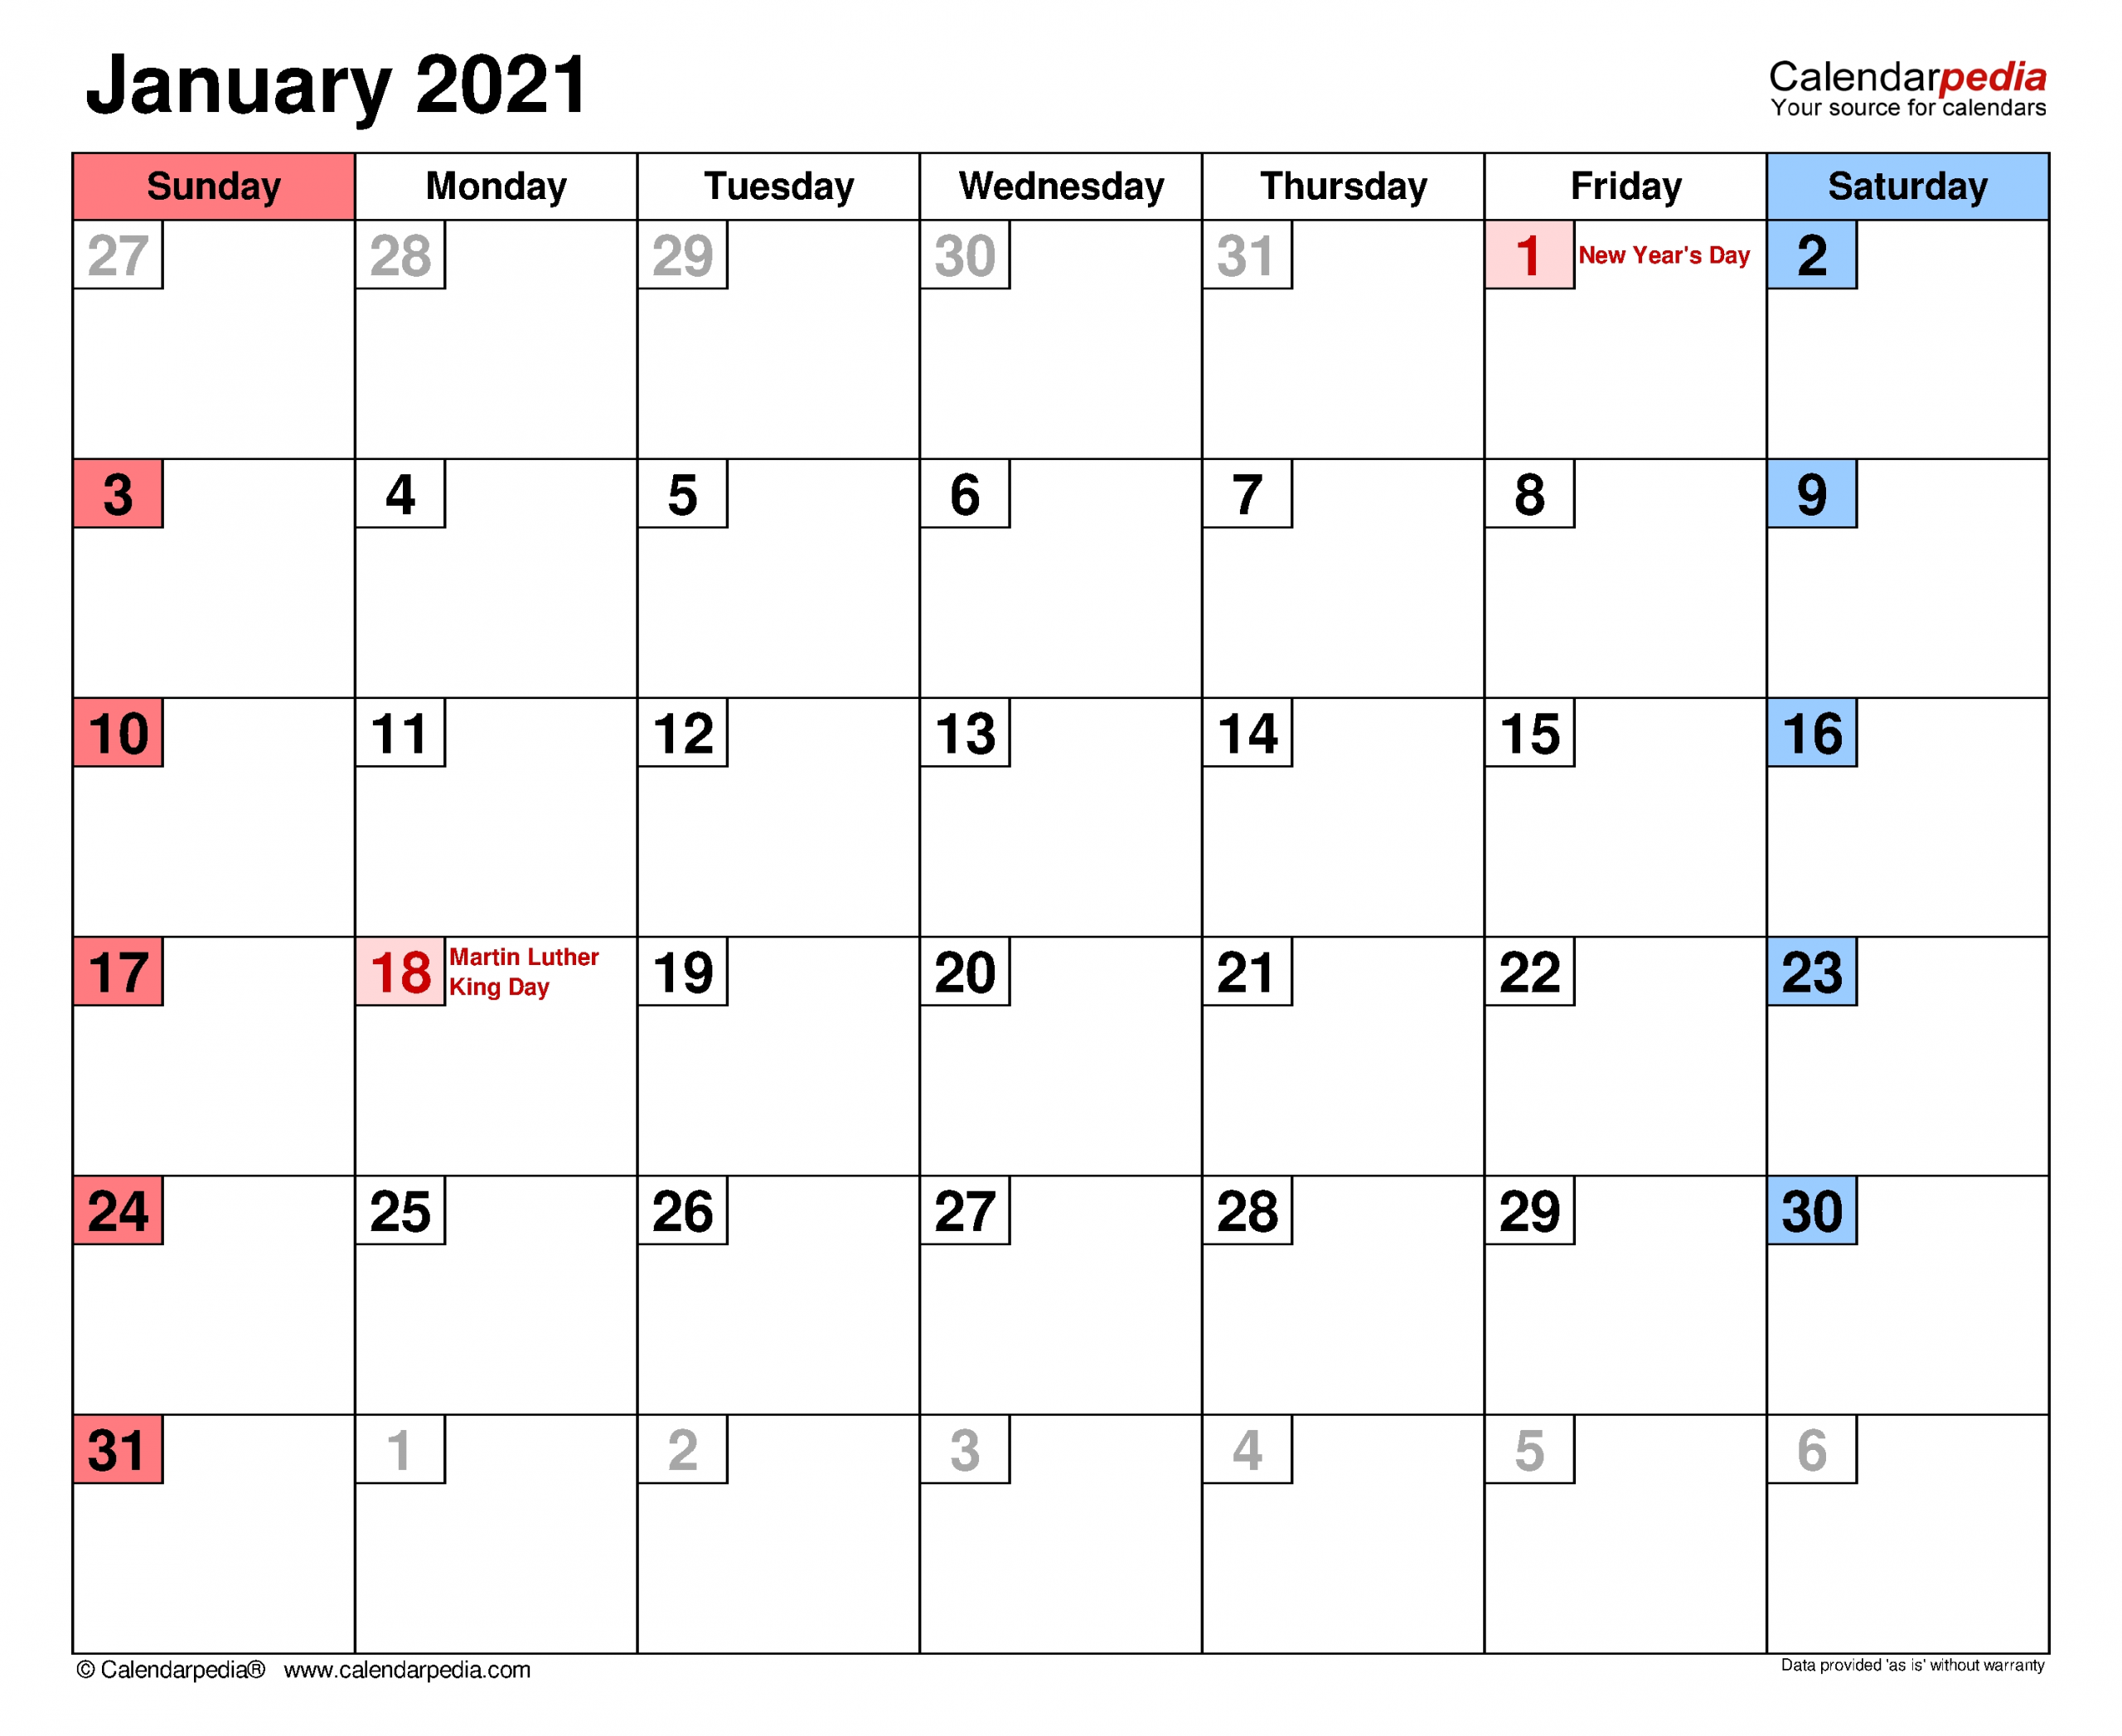 January 2021 Calendar | Templates For Word, Excel And Pdf-Blank Monthly Calendar 2021 June 2021 With Grid